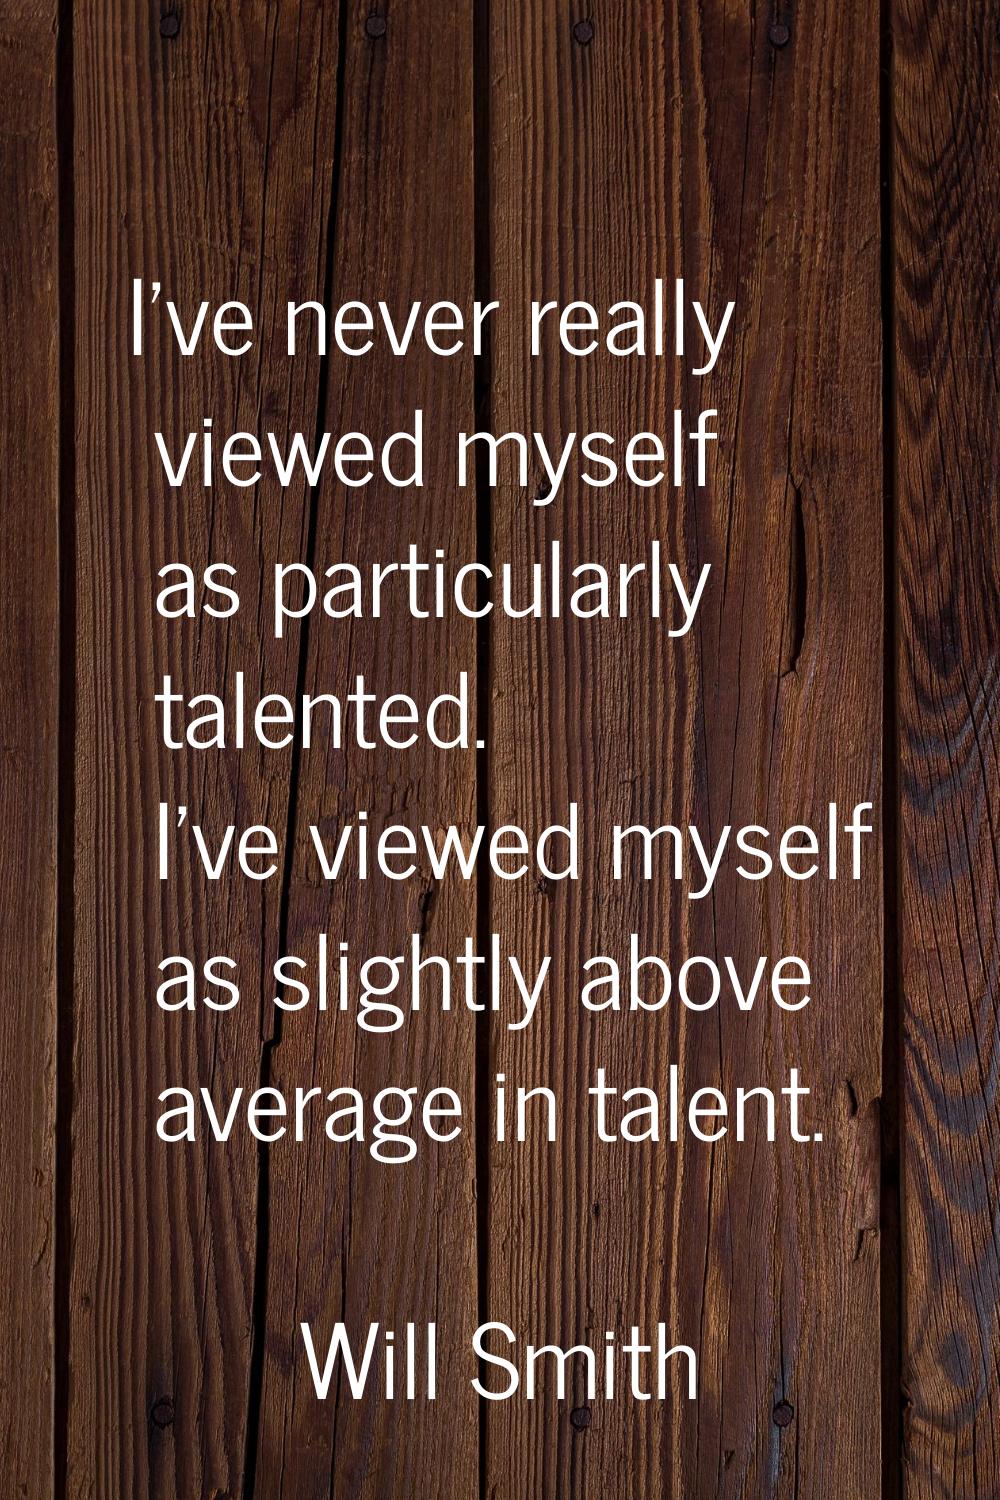 I've never really viewed myself as particularly talented. I've viewed myself as slightly above aver